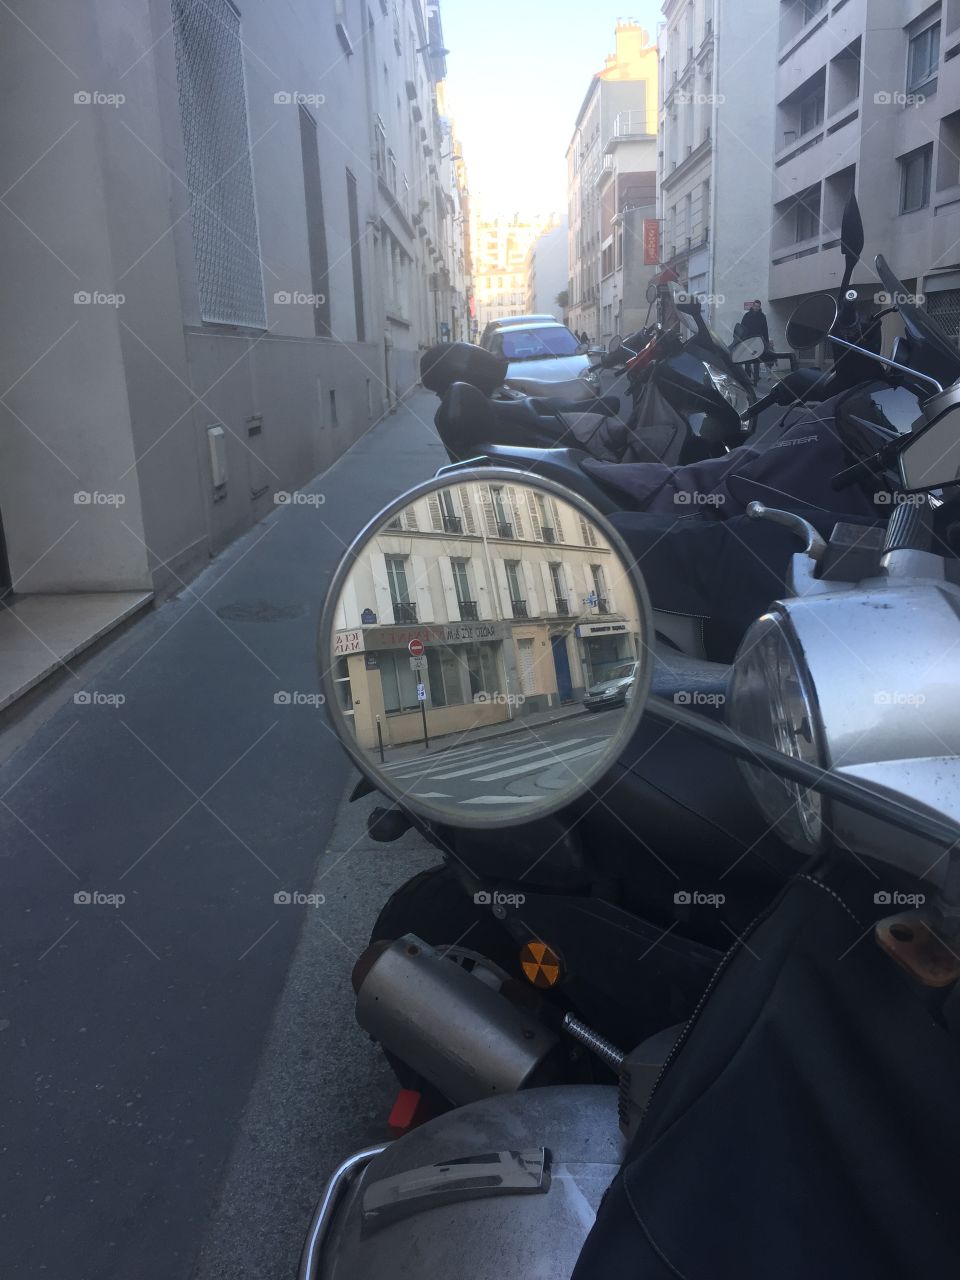 Mirror reflection from a street bike in Paris